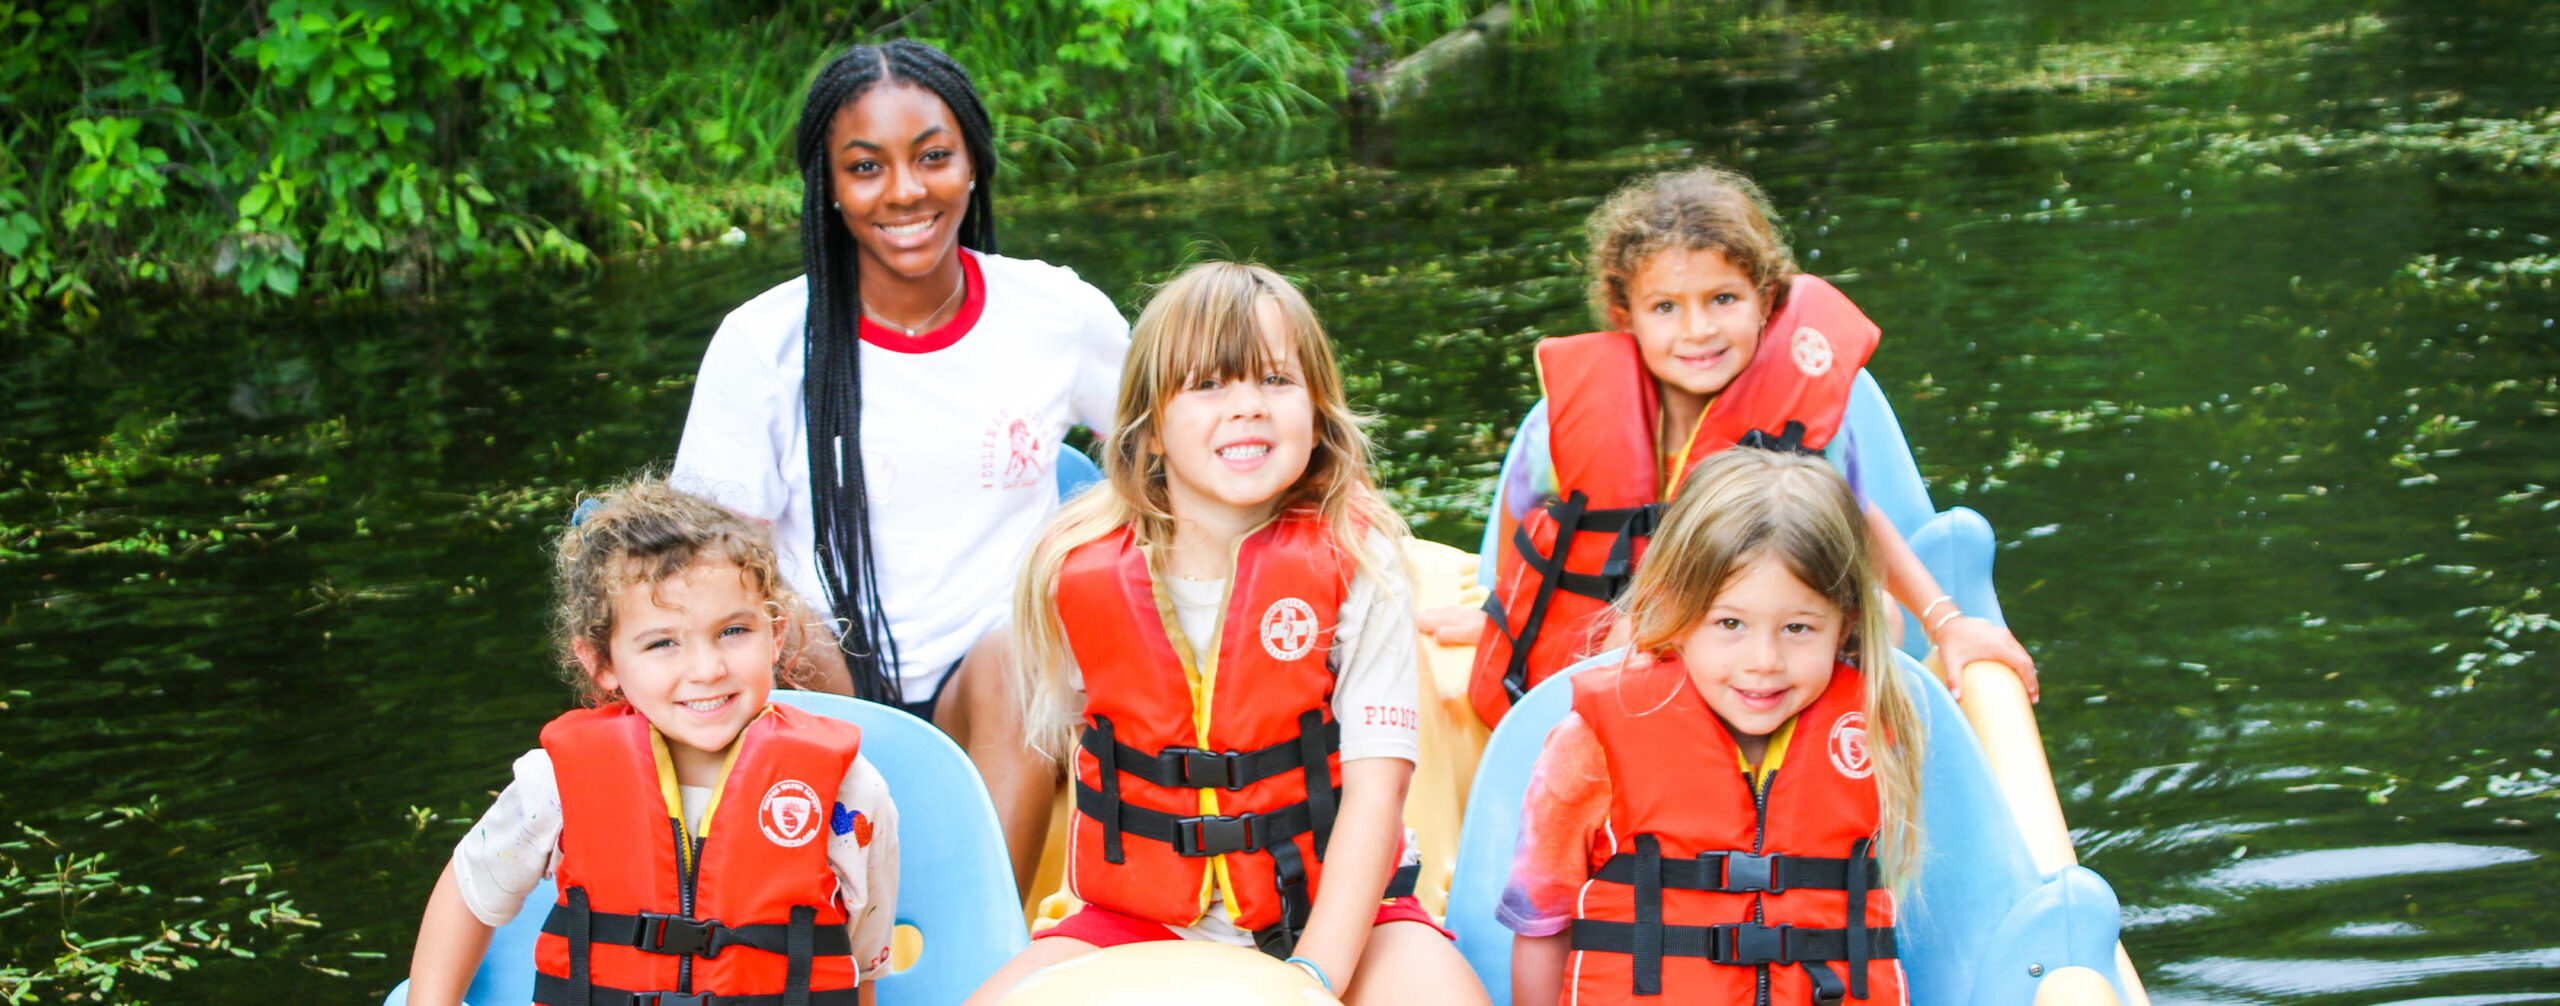 Campers and counselor with life vests on the lake.